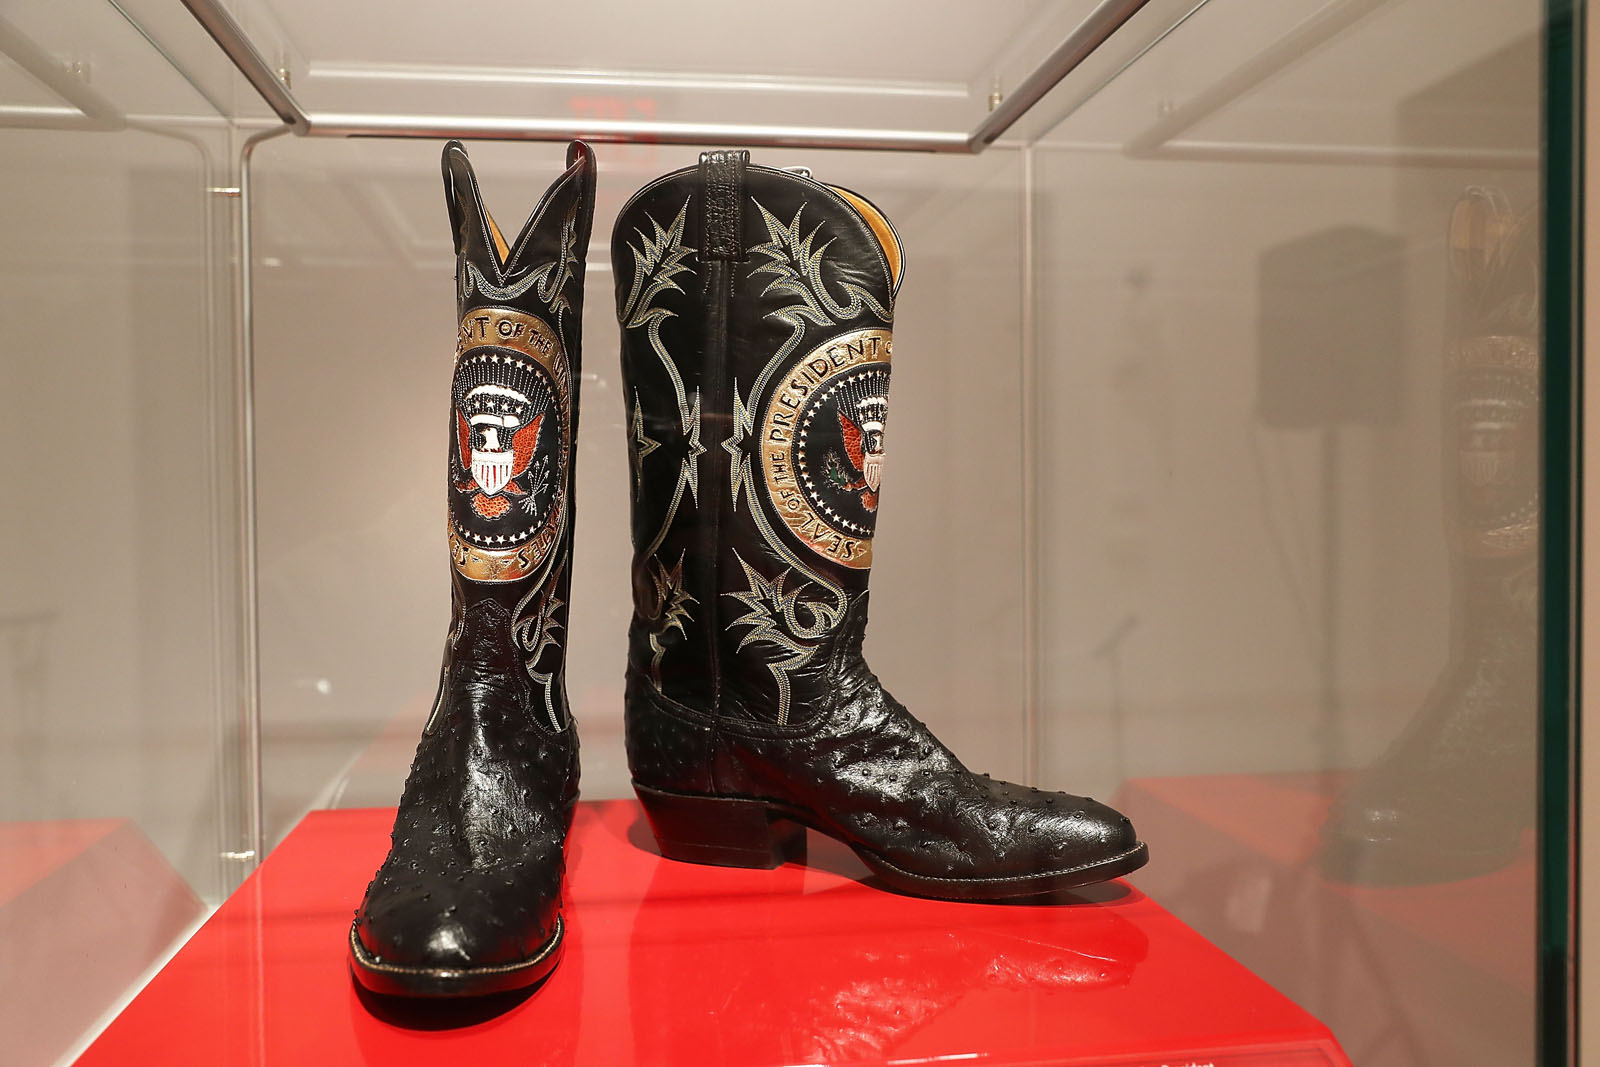 NEW YORK, NY - SEPTEMBER 16:  A pair of 
Ronald Reagan's cowboy boots sit in a case  at Christie's where items from the former president and Nancy Reagan's California home are to be auctioned shortly on September 16, 2016 in New York City. Many personal items of the first couple are to be auctioned including "Hollywood Regency"style furniture and light fixtures, decorative works, handbags, porcelain stamped with the presidential seal, jewelry and a pair of Reagan's cowboy boots with the presidential seal. The e-catalog auction, which is expected to generate more than $2 million with individual items ranging from $1,000 to $50,000, goes live at Christie's Monday in New York. Proceeds from the auction will be donated to the Ronald Reagan Presidential Foundation and Institute.  (Photo by Spencer Platt/Getty Images)